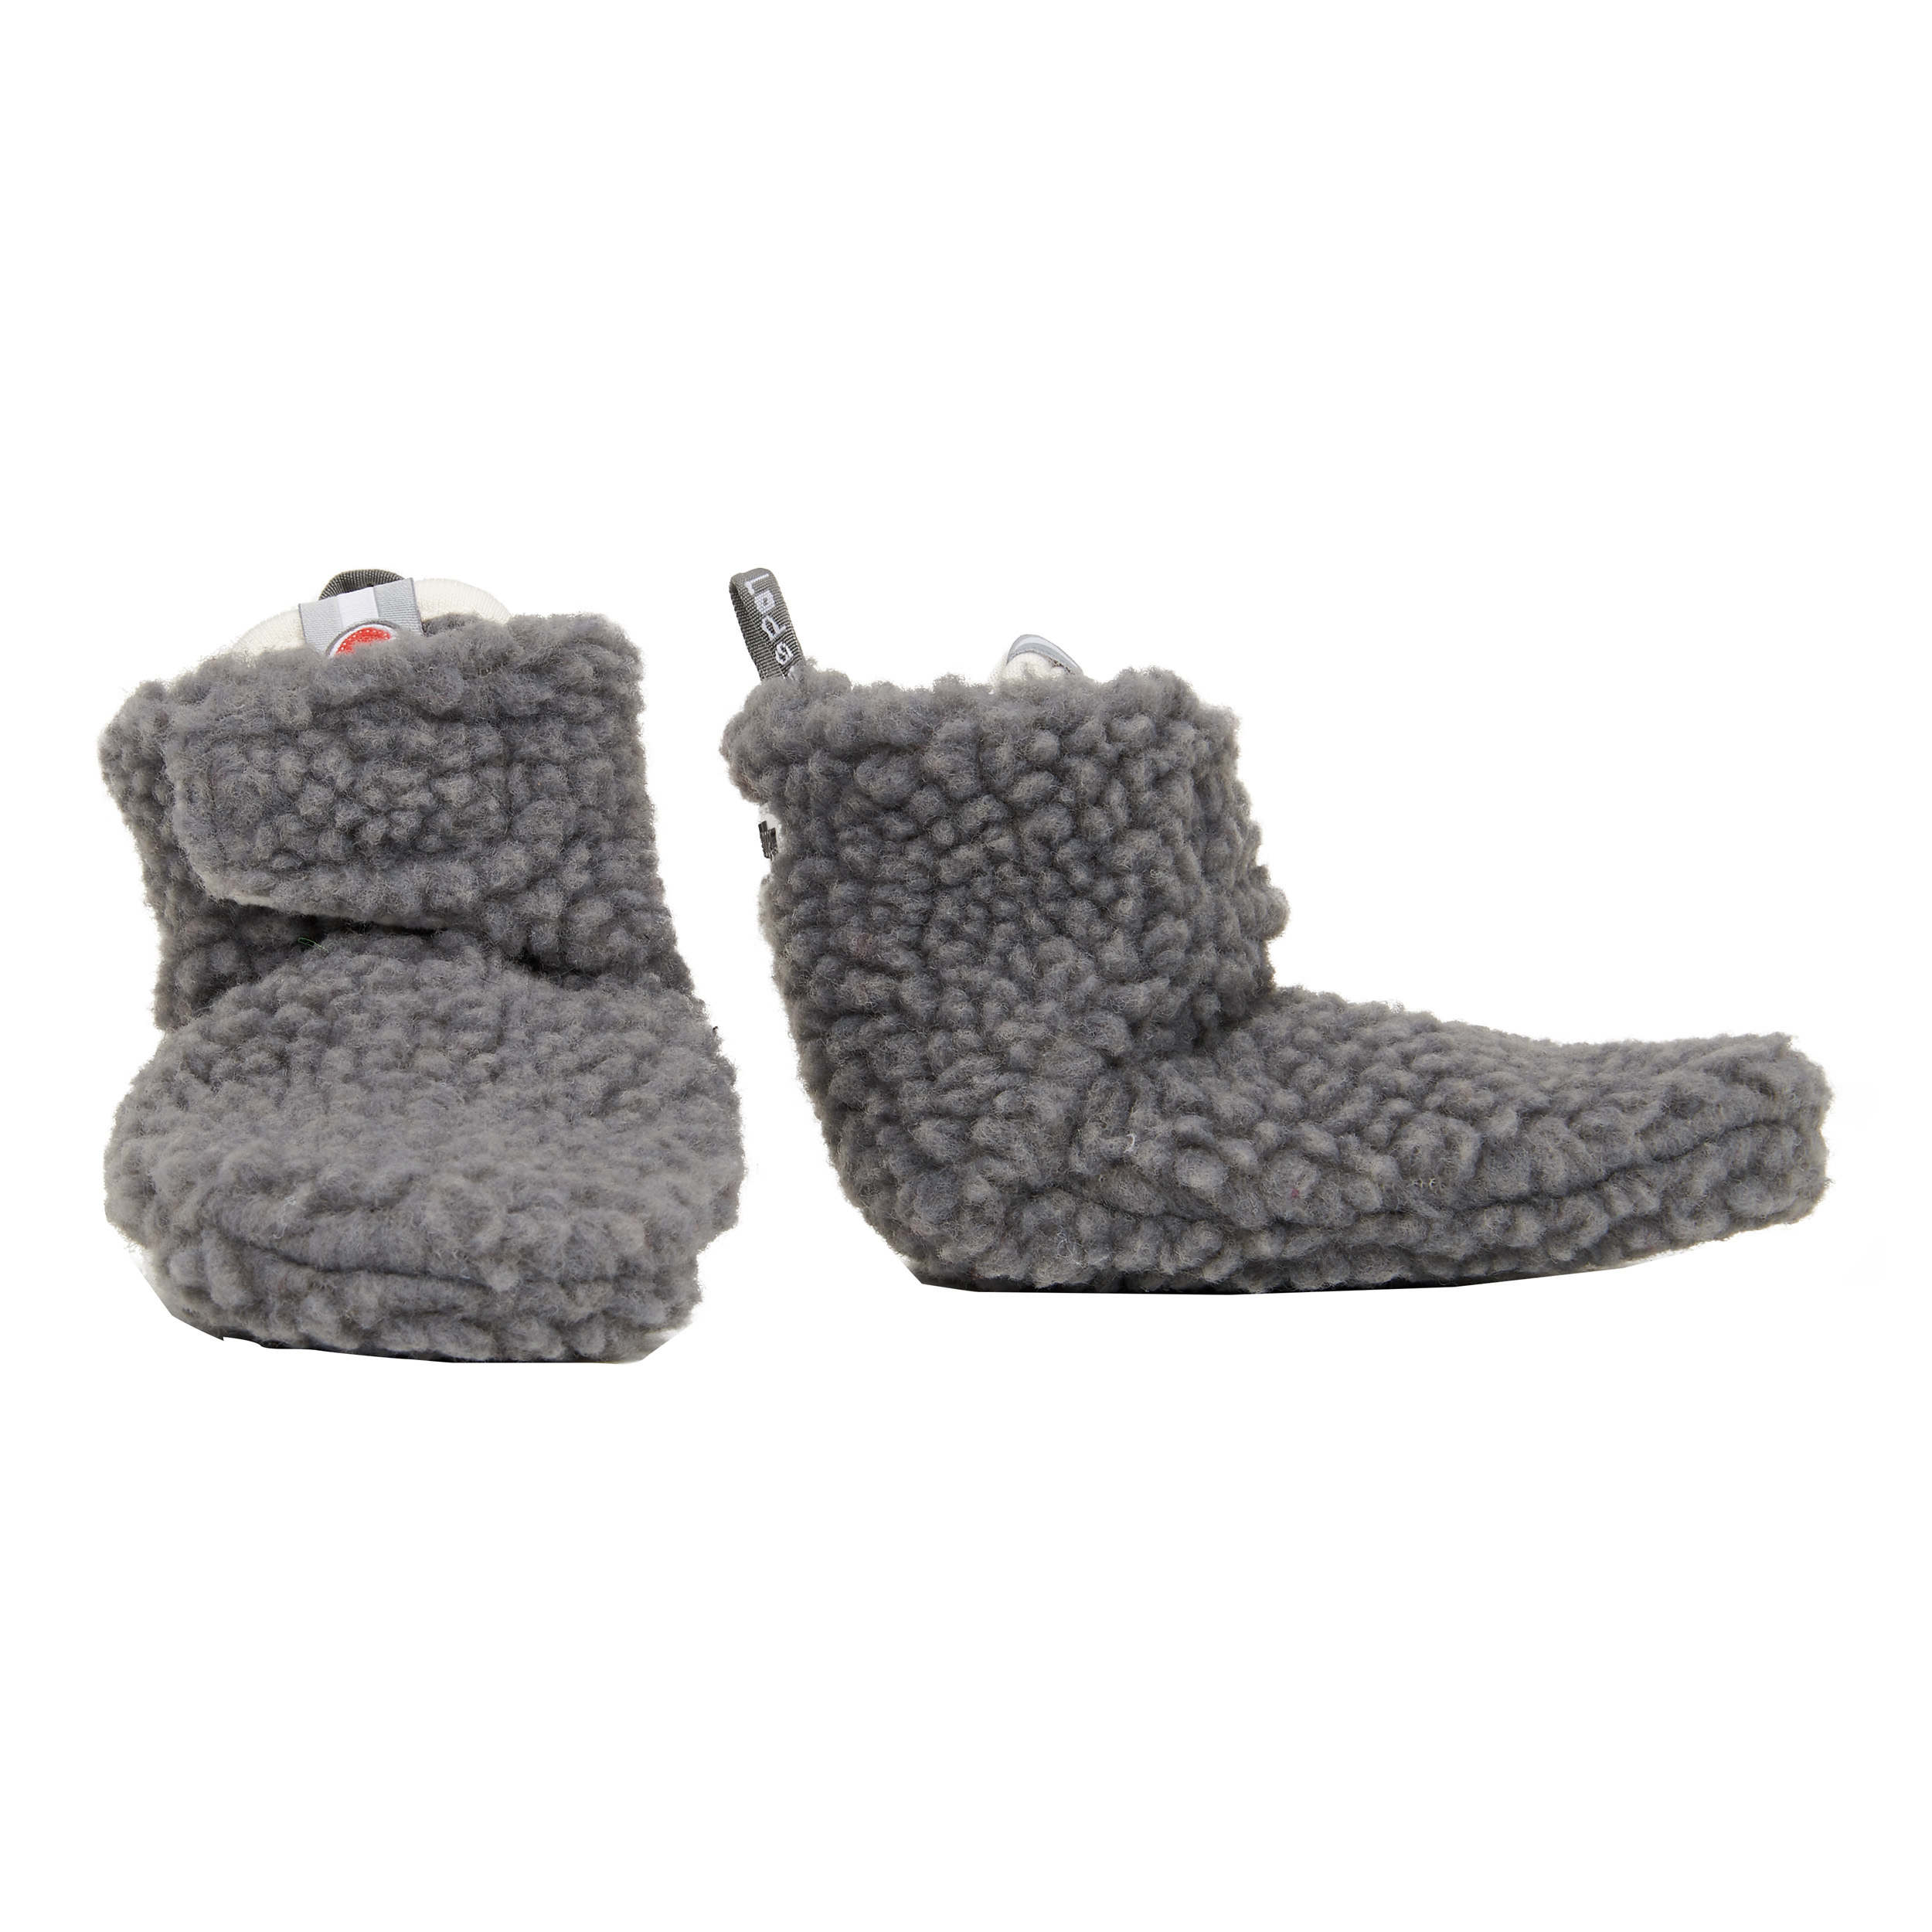 Lodger Teddy baby booties lined with 